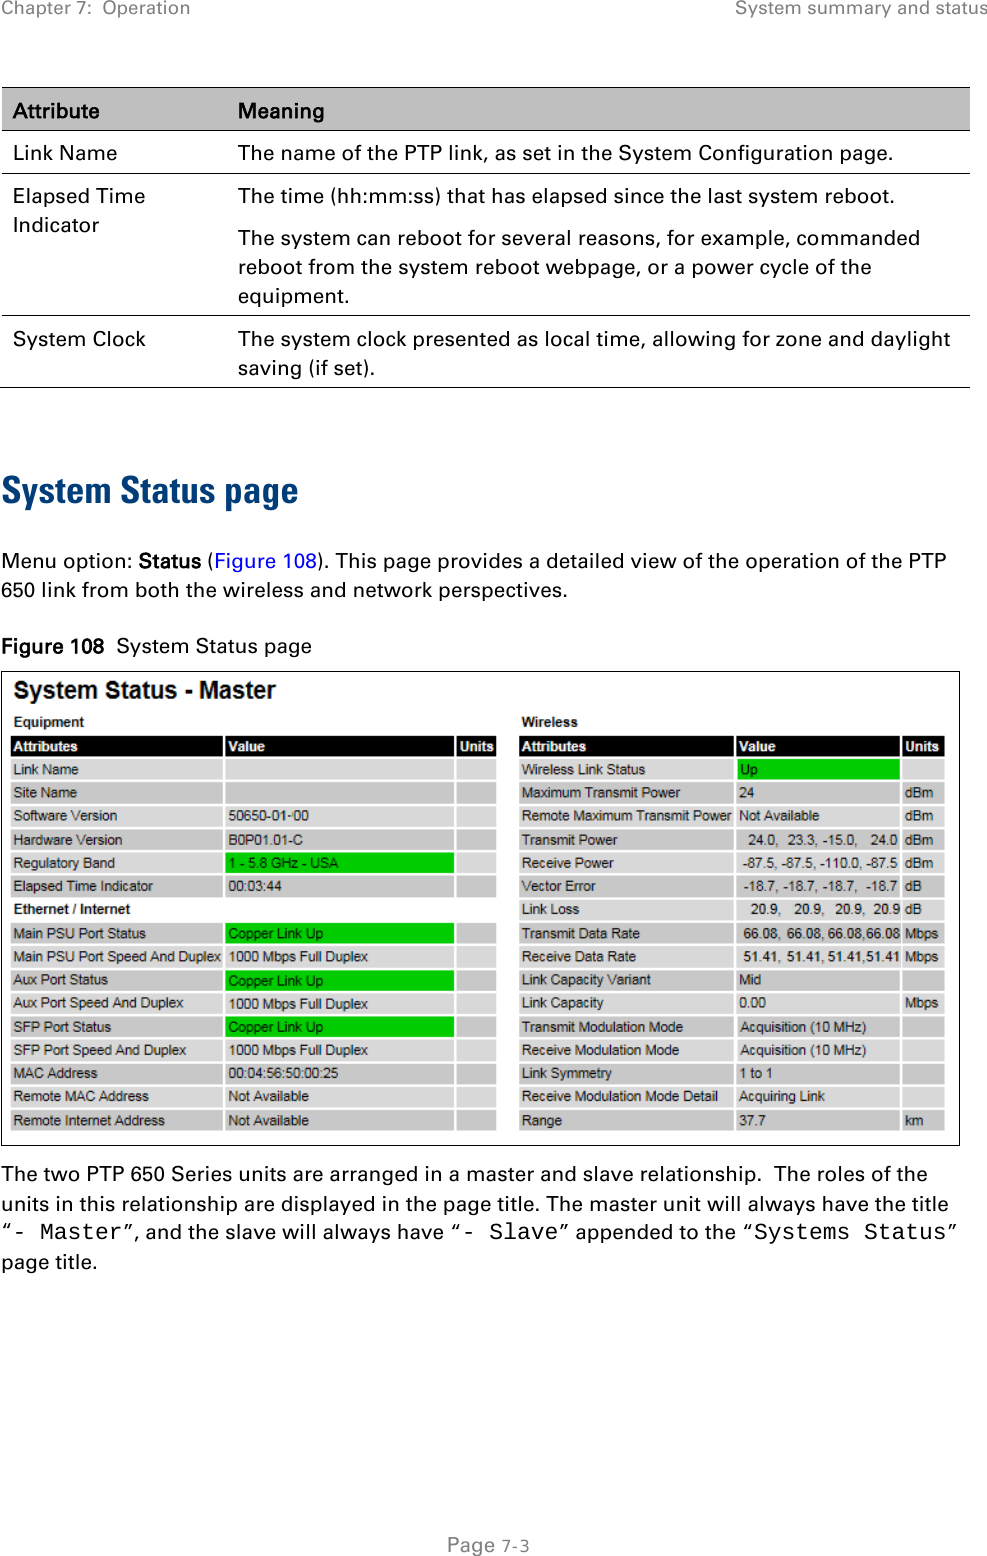 Chapter 7:  Operation System summary and status  Attribute Meaning Link Name The name of the PTP link, as set in the System Configuration page.  Elapsed Time Indicator The time (hh:mm:ss) that has elapsed since the last system reboot. The system can reboot for several reasons, for example, commanded reboot from the system reboot webpage, or a power cycle of the equipment. System Clock The system clock presented as local time, allowing for zone and daylight saving (if set).  System Status page Menu option: Status (Figure 108). This page provides a detailed view of the operation of the PTP 650 link from both the wireless and network perspectives. Figure 108  System Status page  The two PTP 650 Series units are arranged in a master and slave relationship.  The roles of the units in this relationship are displayed in the page title. The master unit will always have the title “- Master”, and the slave will always have “- Slave” appended to the “Systems Status” page title.   Page 7-3 